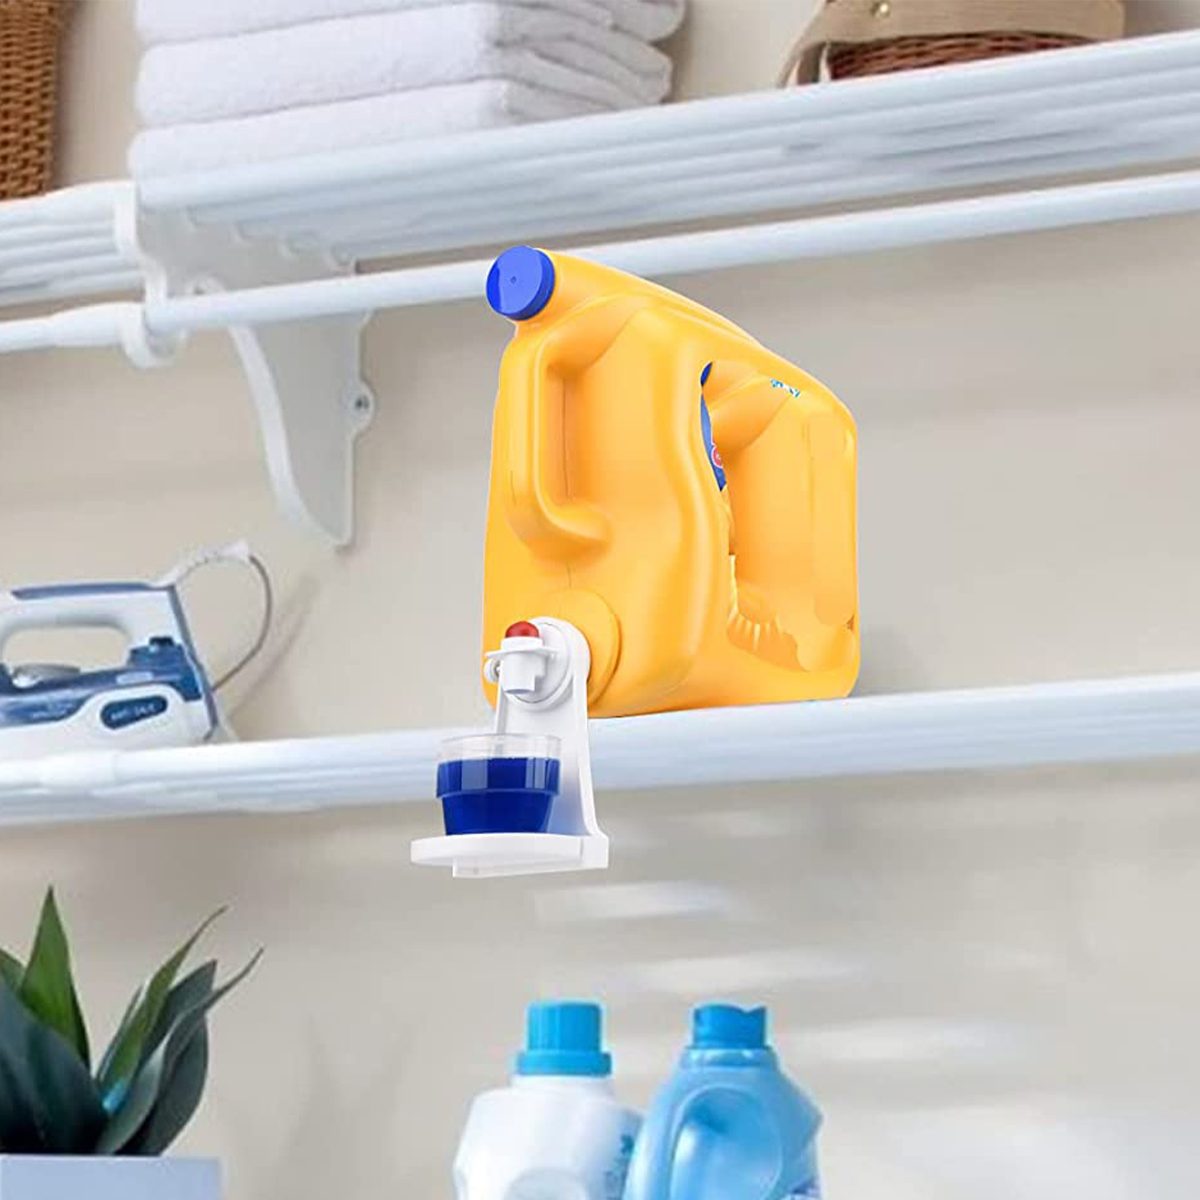 11 Laundry Products That Make Wash Day A Breeze FT Via Amazon.com  ?w=1200